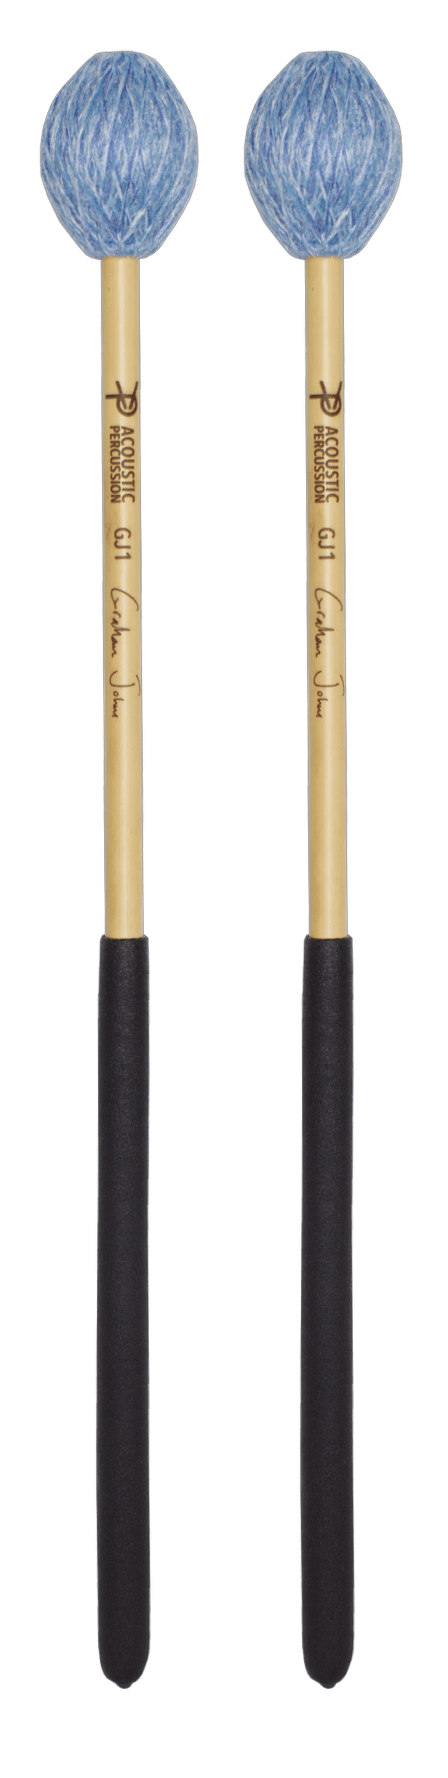 Acoustic Percussion GJ1 Cymbal Mallets